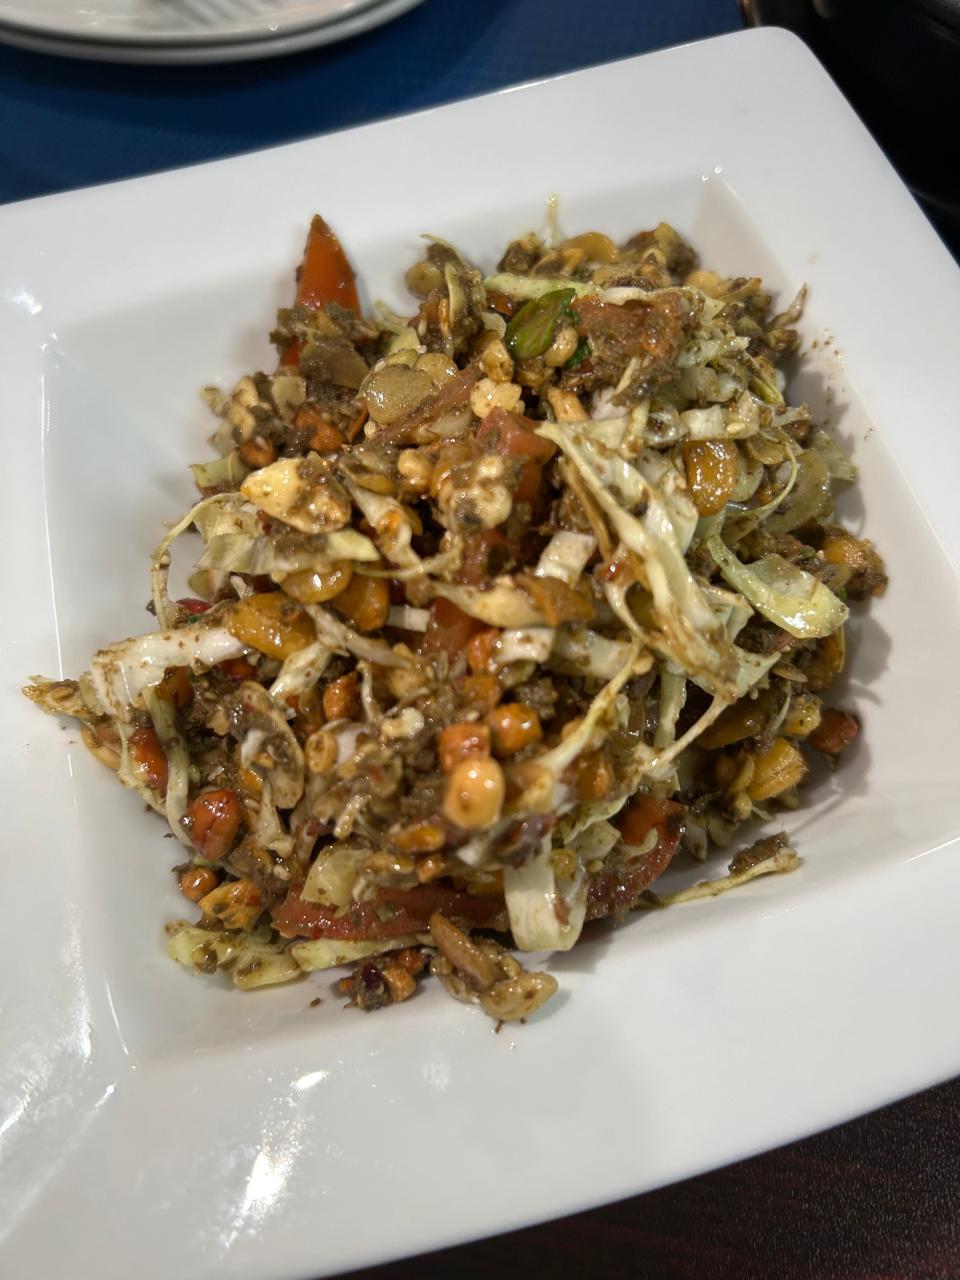 Burmese tea salad at Lyeh Thai is made with tea leaves, crispy beans, cabbage, tomato, nuts and other Burmese ingredients.